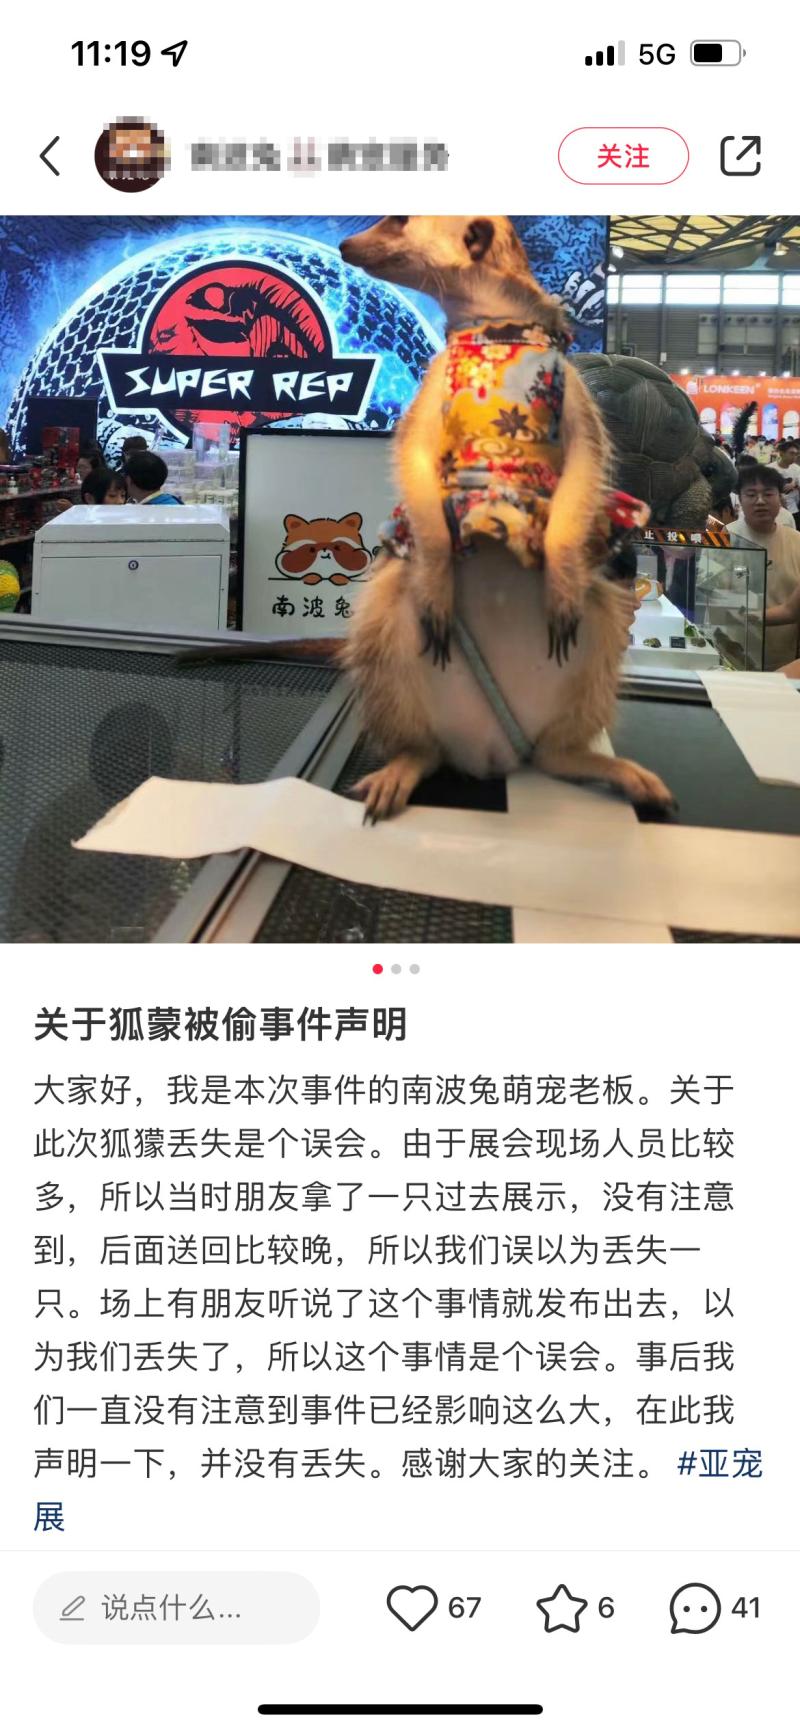 Is Ding Man, a Red Fox Mongoose, Stolen from Asia Pet Exhibition Network? Store responds to visitors | incident | Store